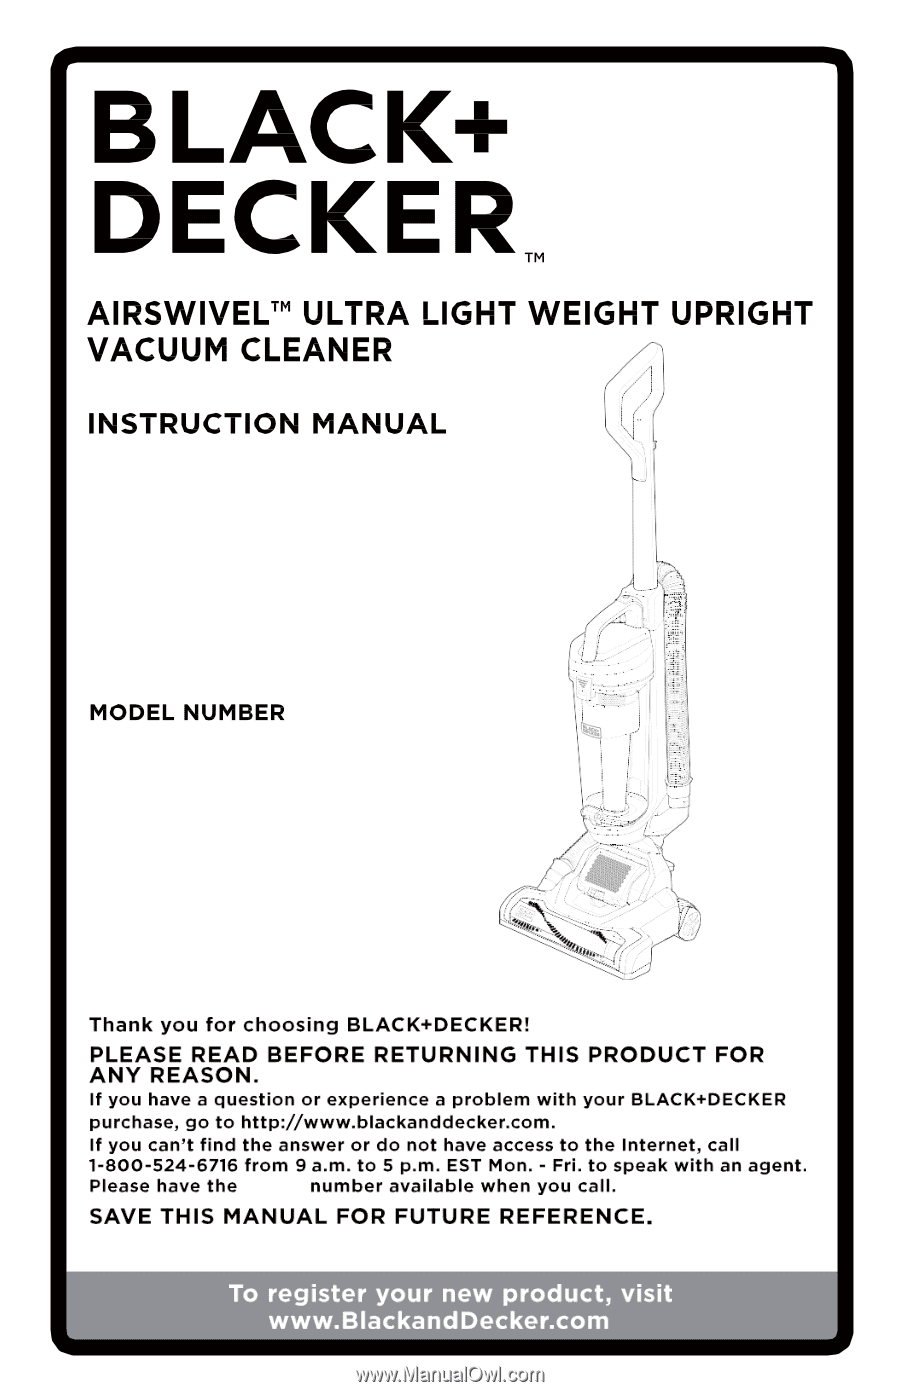 Vacuum Belt and Instruction Manual for Black+Decker Airswivel UltraLight  Weight